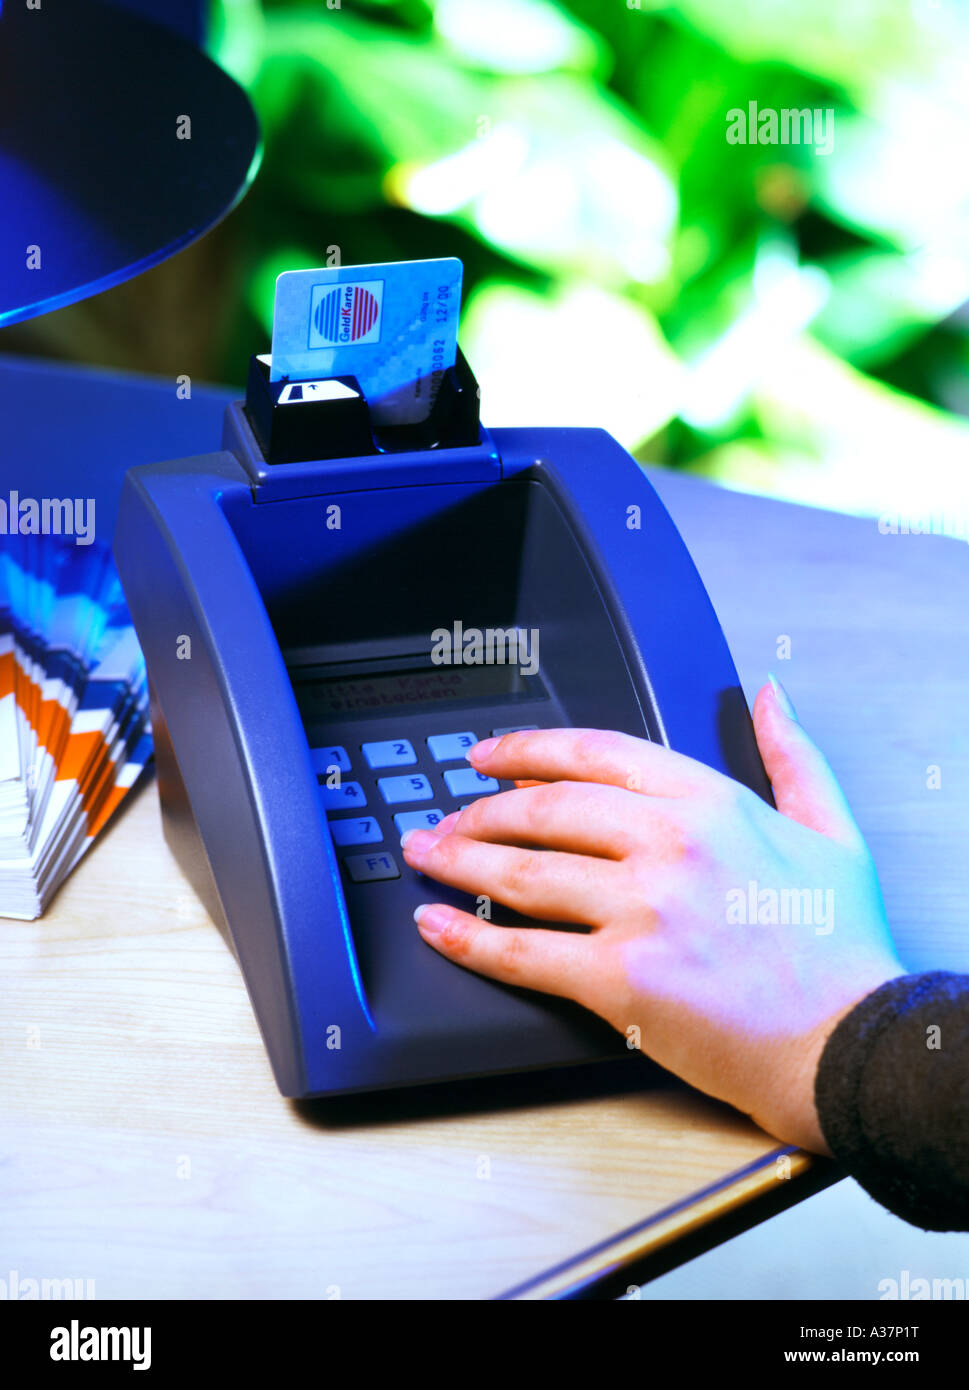 Bargeldlose Bezahlung, Paying with Credit Card EC Card at a Terminal Stock Photo